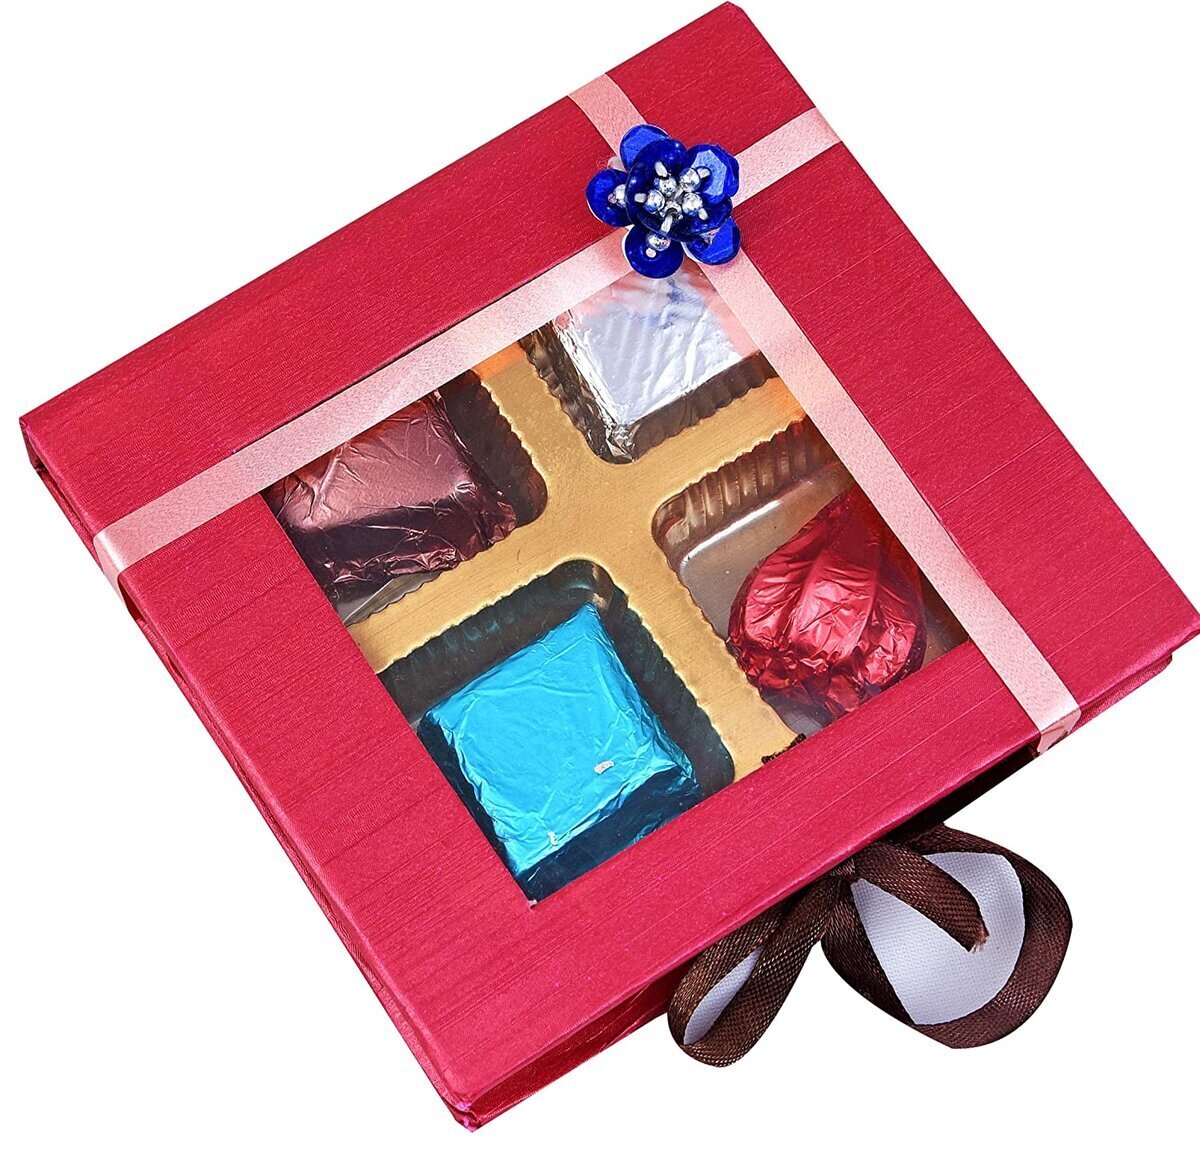 Celebrate the Bond of Love: Send Rakhi with Chocolates to Your Brother